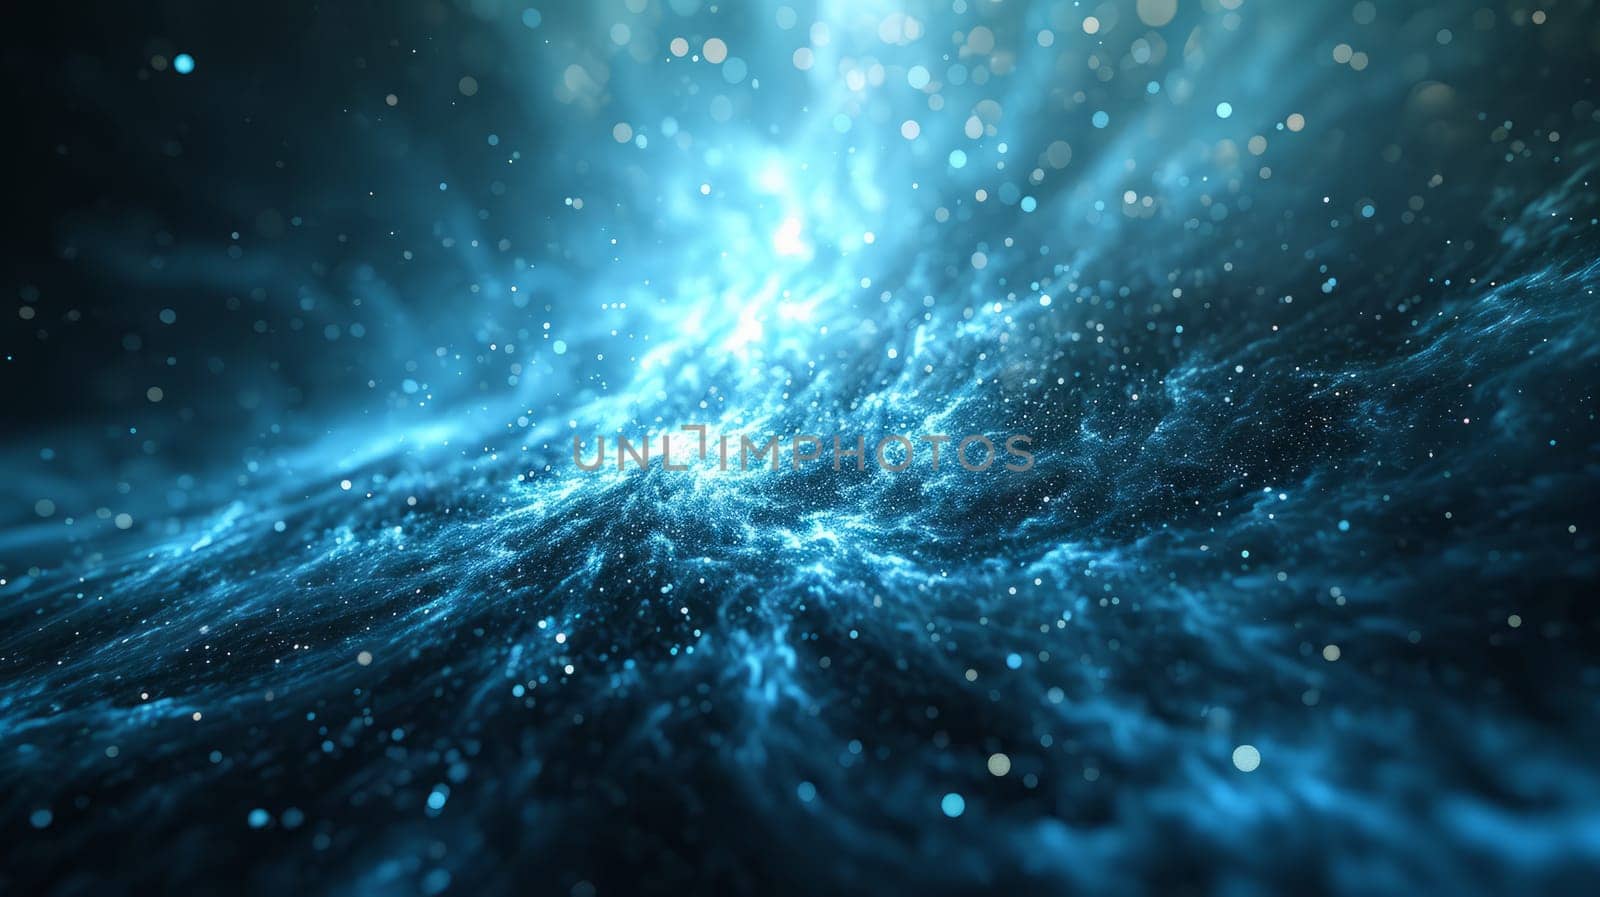 Network technologies. Futuristic blue tech background 3d illustration with glowing particles AI